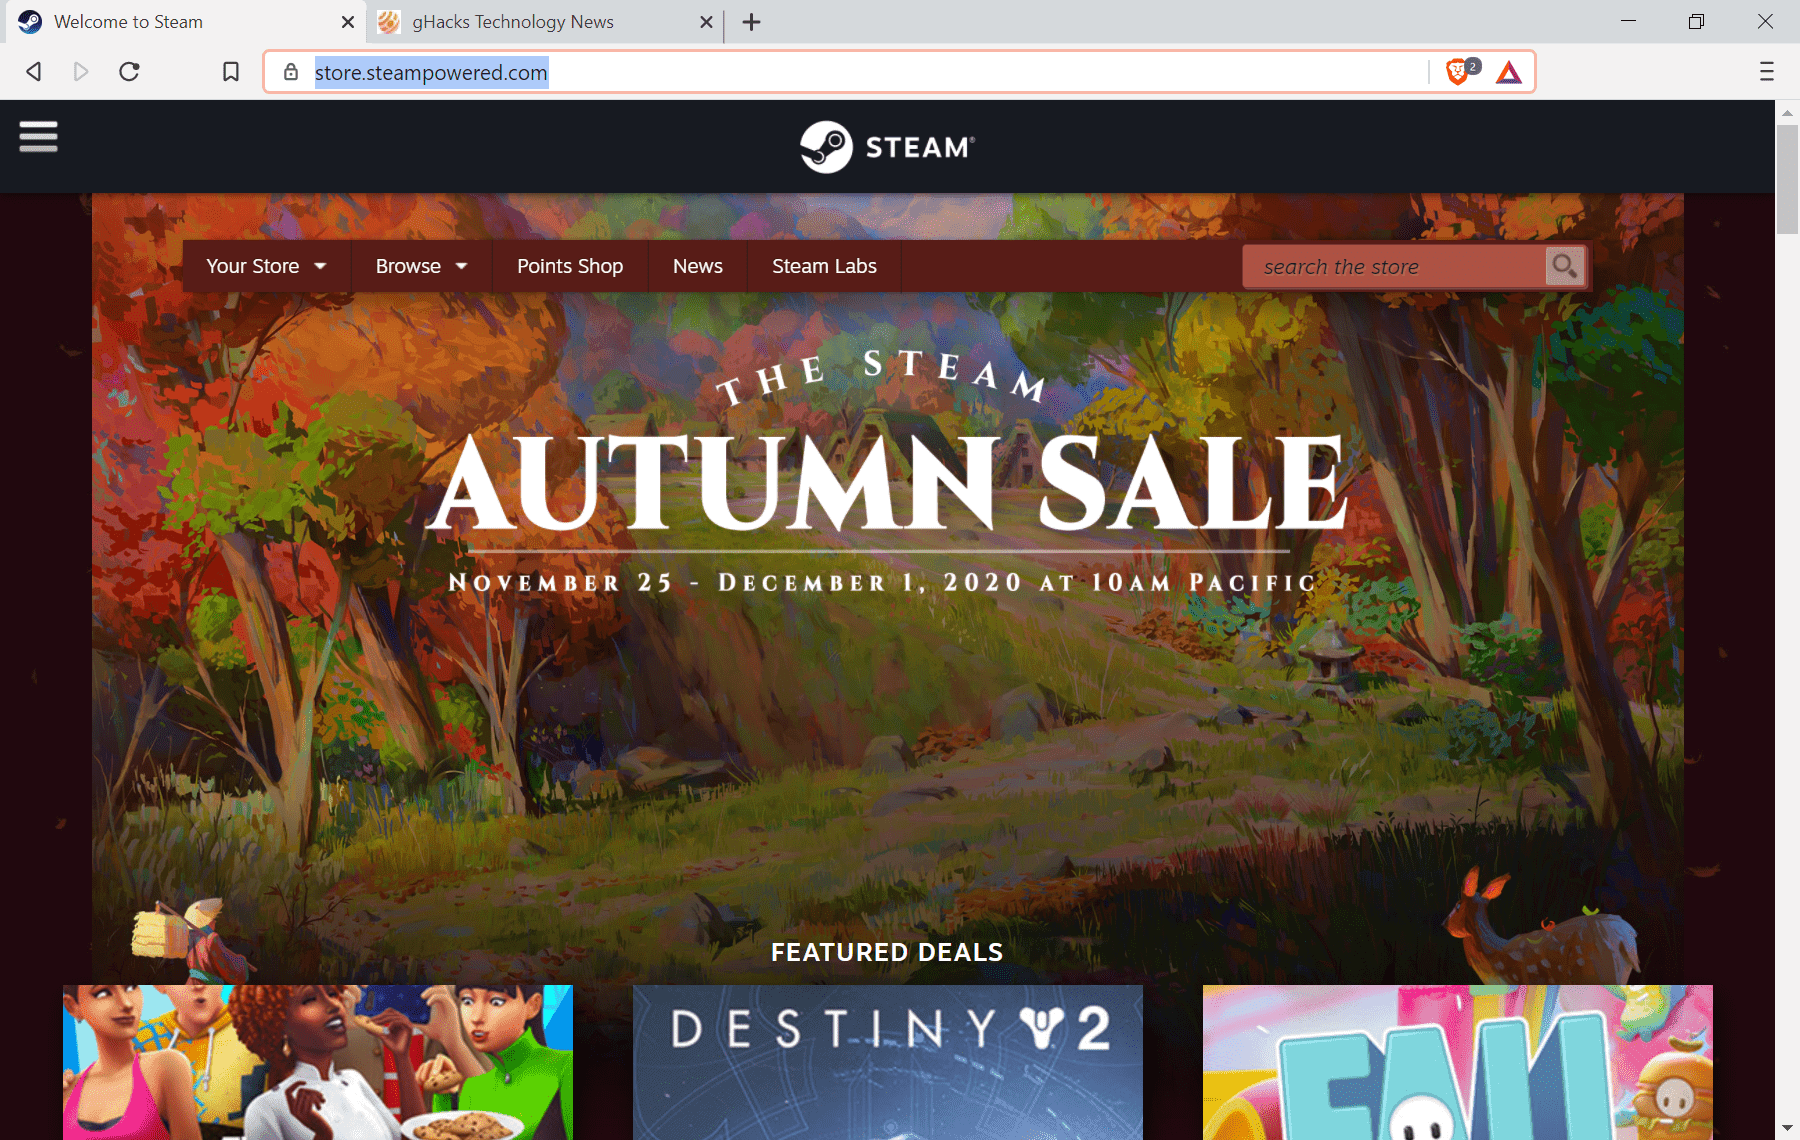 Steam Autumn Sale 2020 here are 8 game suggestions gHacks Tech News